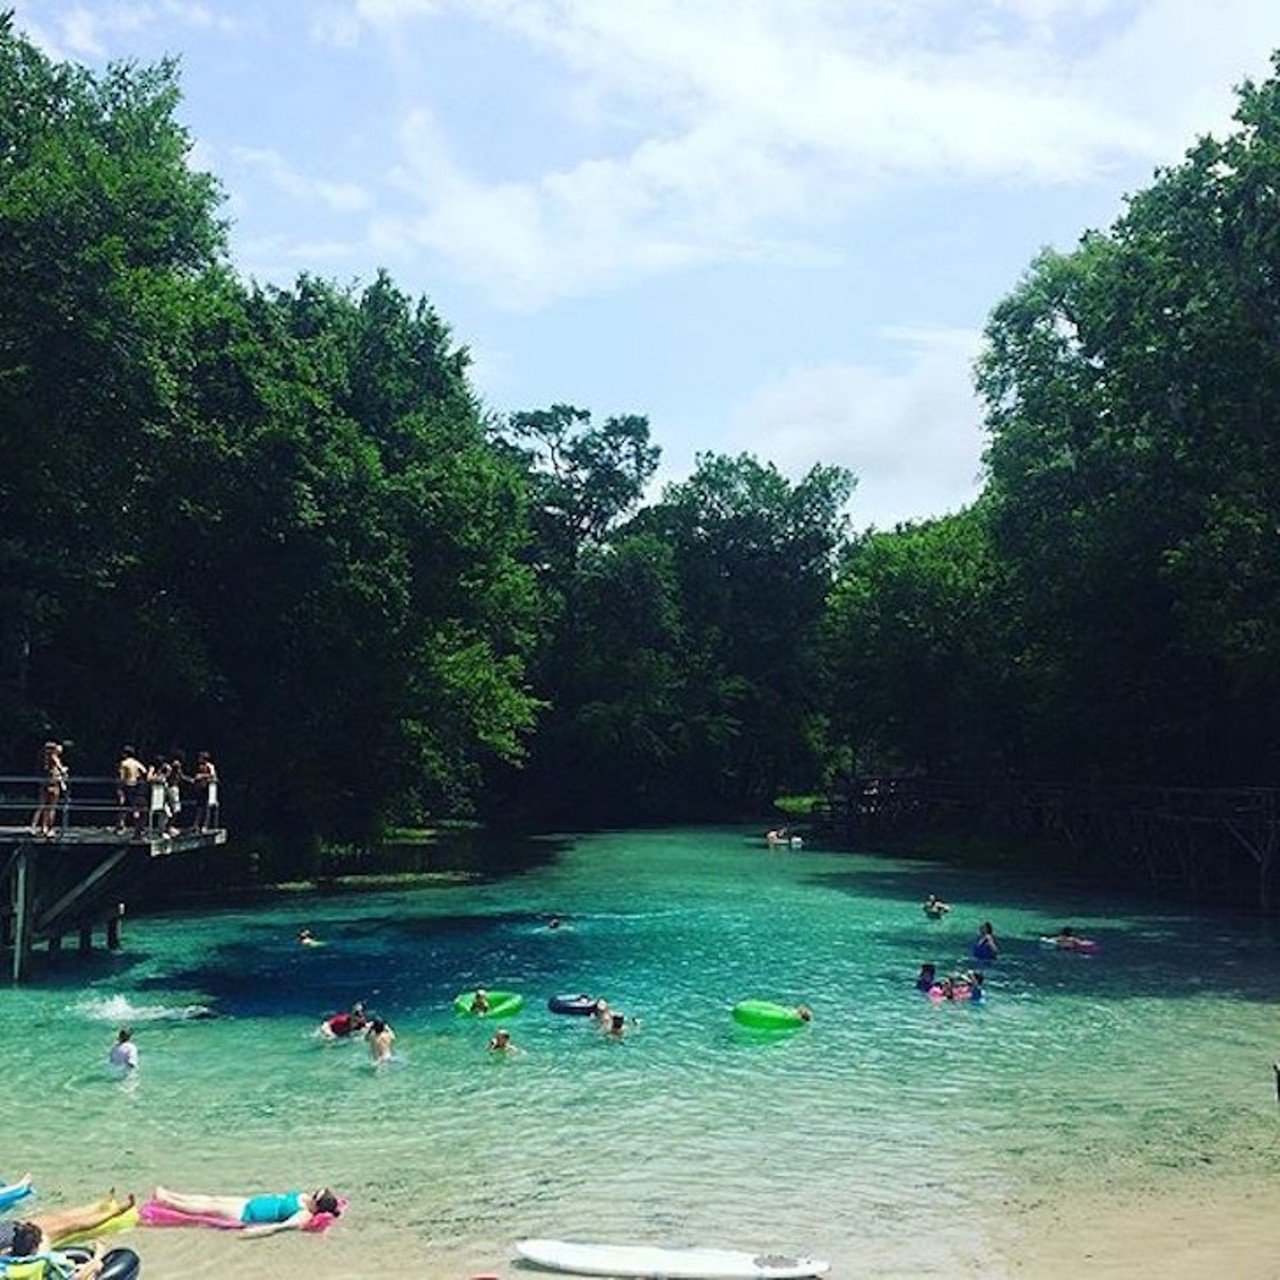 Blue Springs
7450 NE 60th St., High Springs, 386-454-1369
Distance: About 2 hours and 15 minutes from Orlando
Photo via tybliss1/Instagram